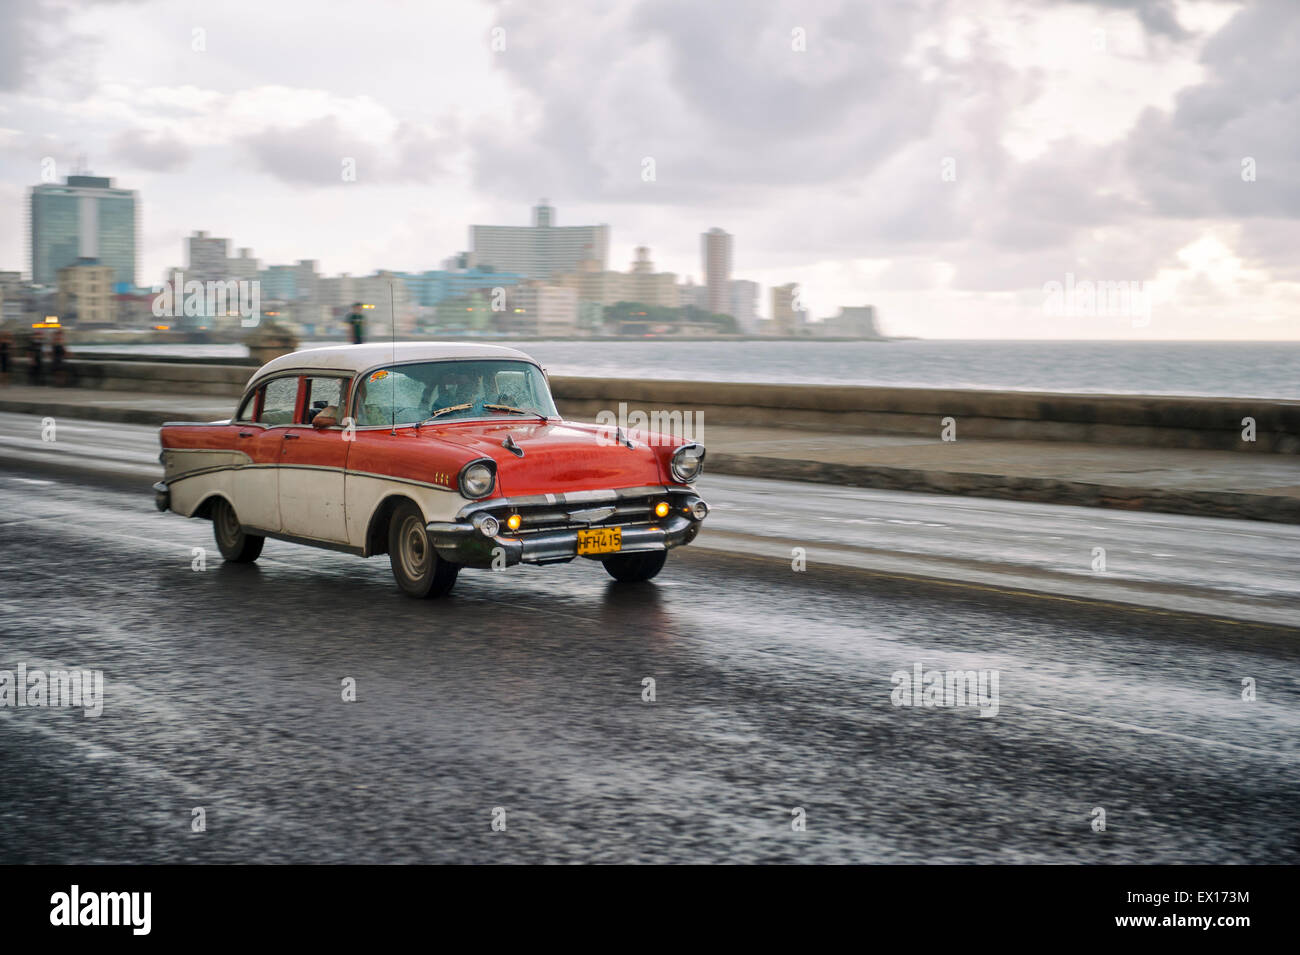 HAVANA, CUBA - JUNE 13, 2011: Classic old fashioned 50s car passes in front of the city skyline along the seafront Malecon road. Stock Photo